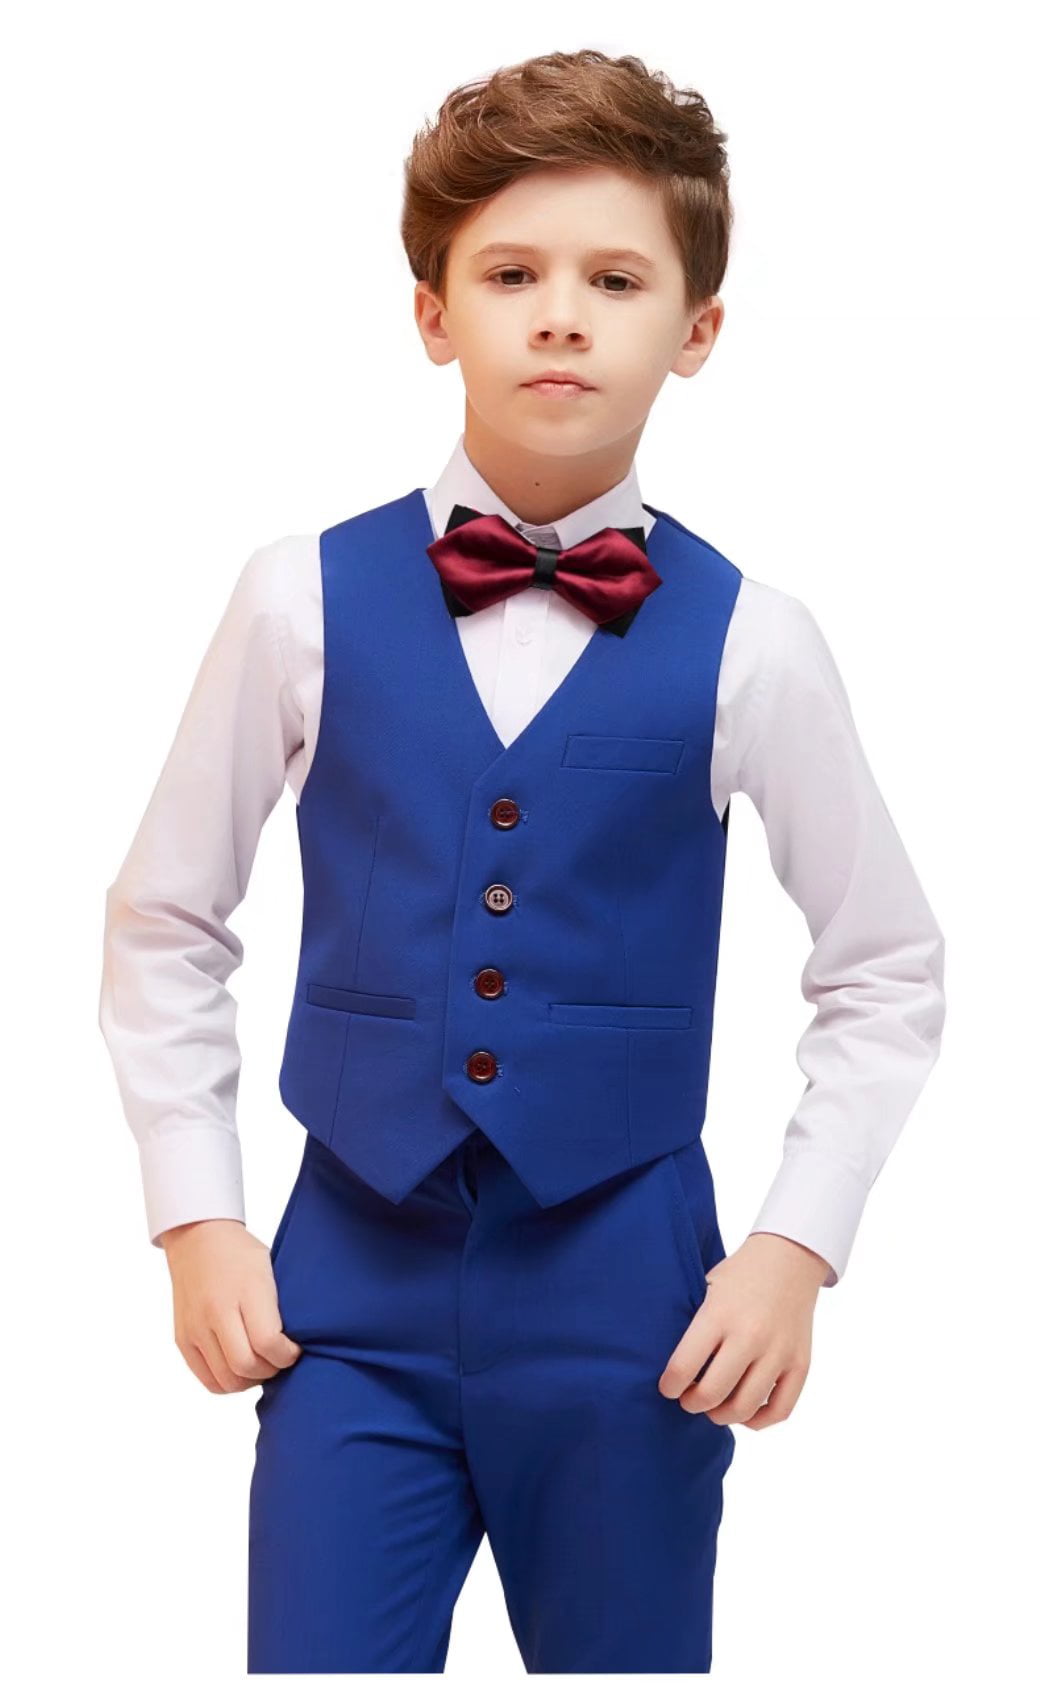 Visaccy 3 Buttons Boys Girls Fully Lined Formal Suit Vest 